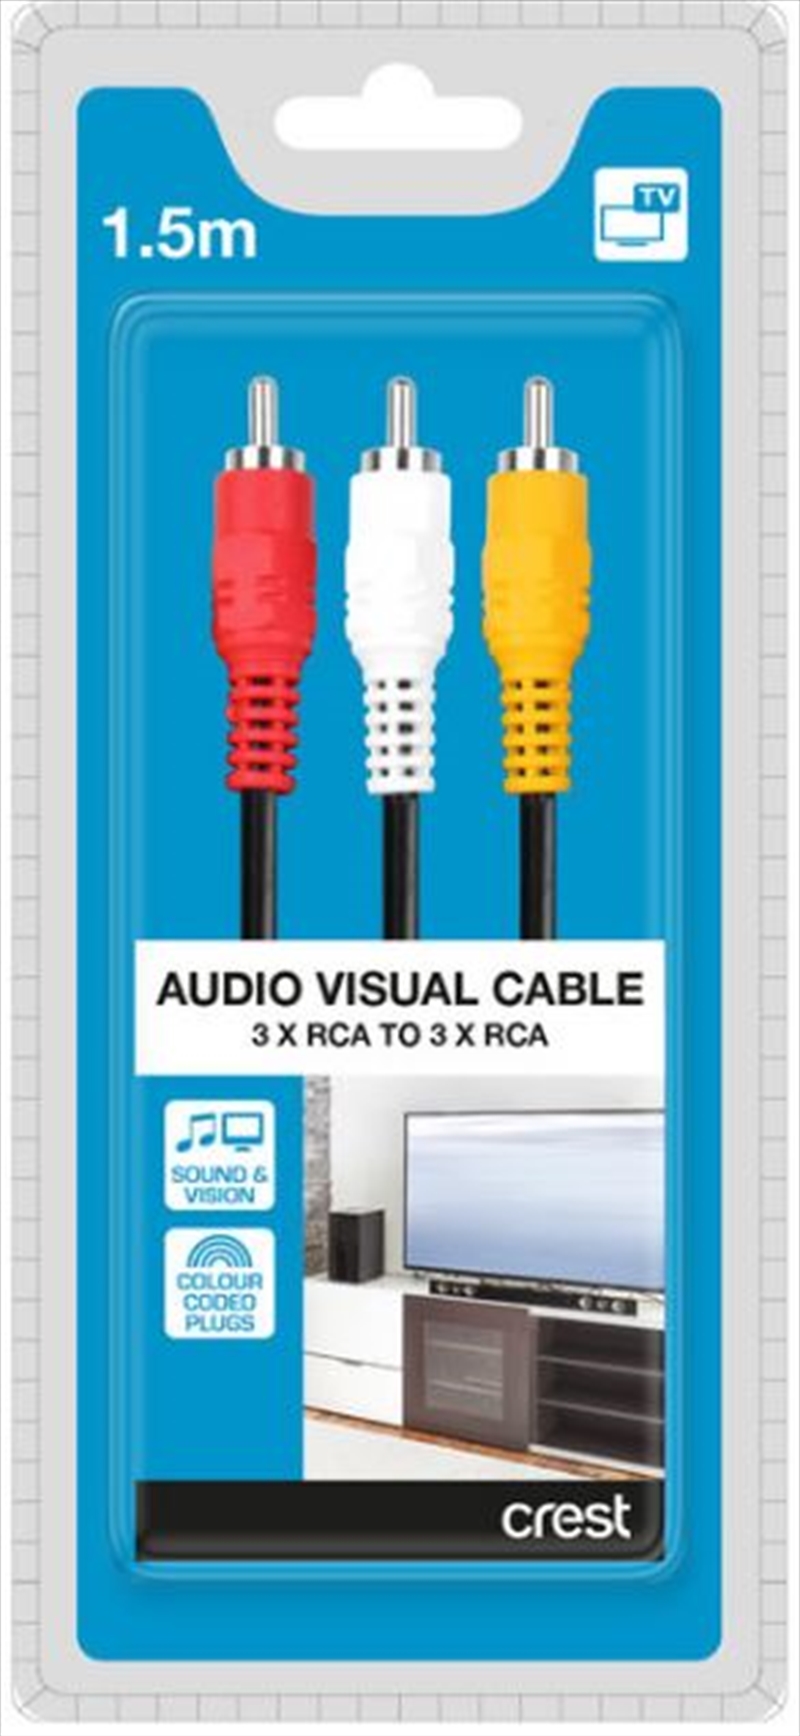 3 Rca Av Cable 1.5M - Audio Visual Cable/Product Detail/Cables